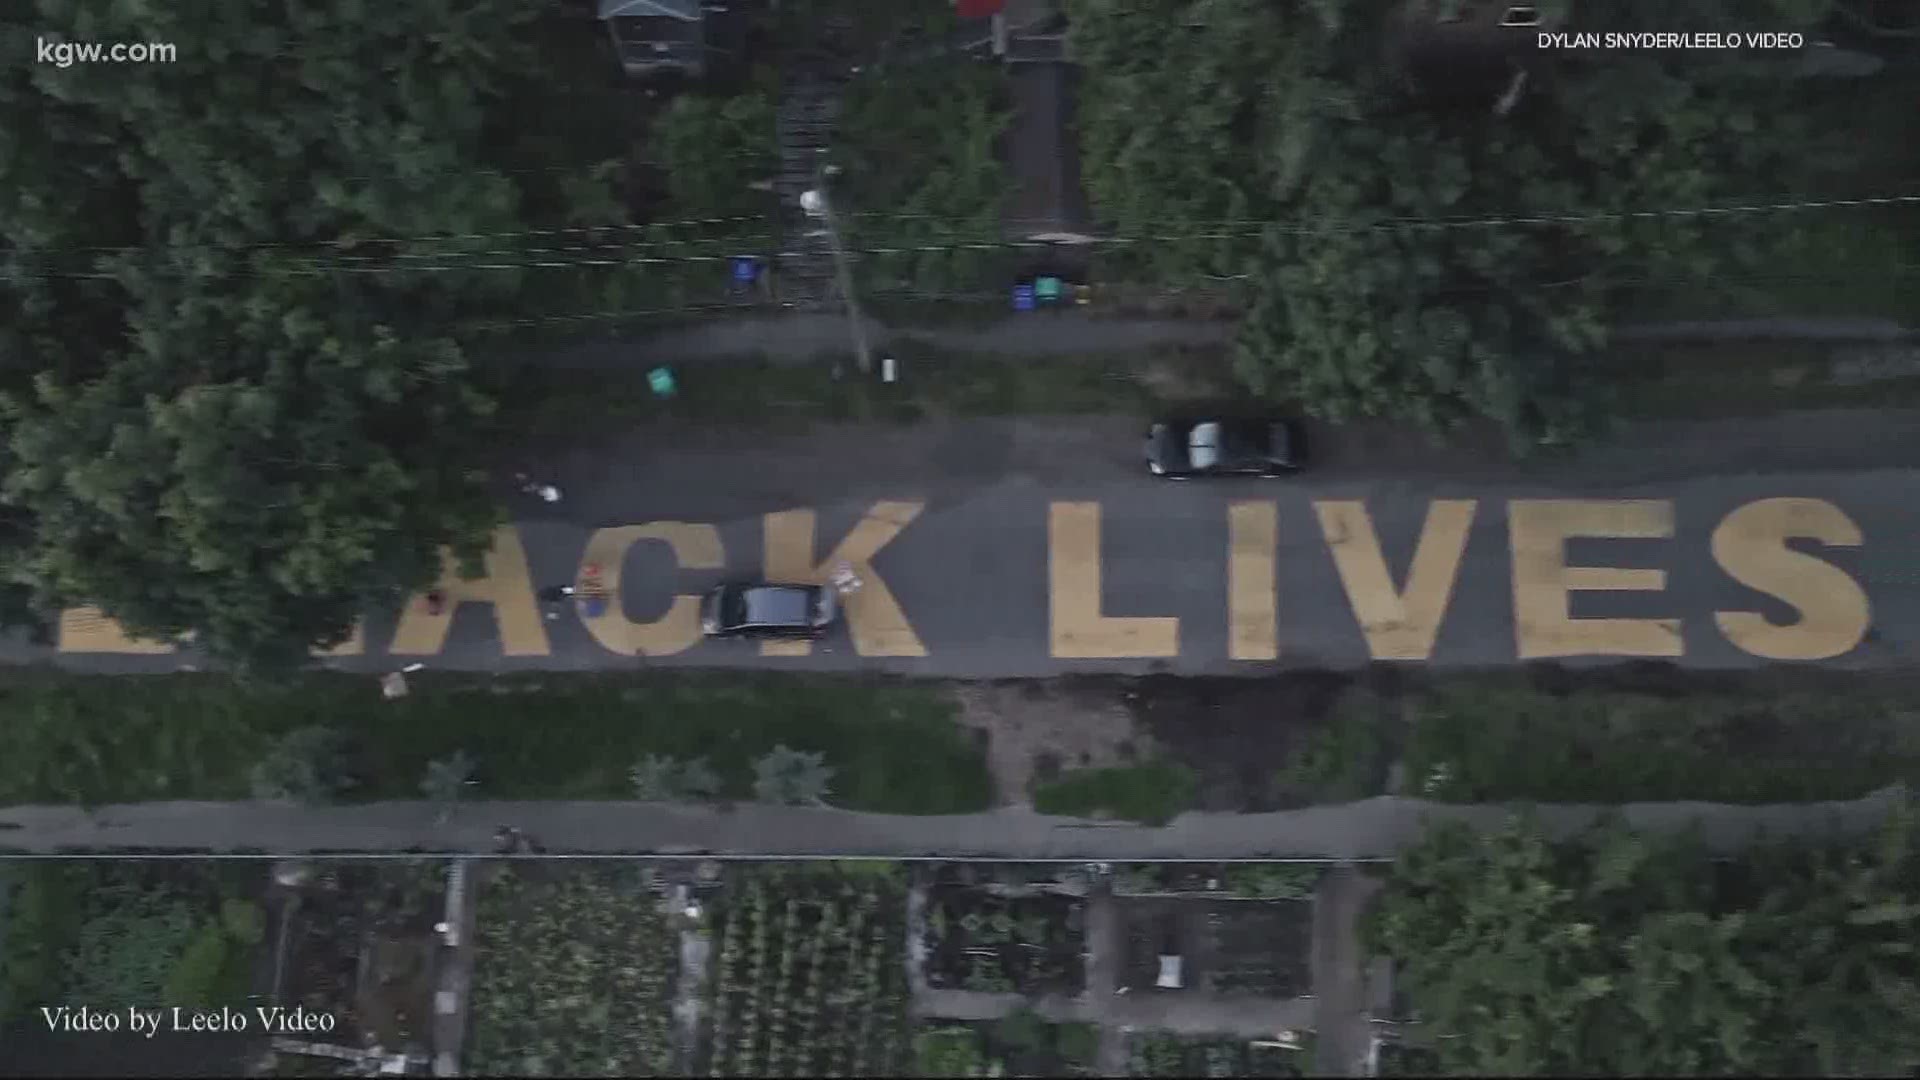 An artist painted Black Lives Matter on a Portland street in St. Johns, with Portland’s racist past written in the letters.